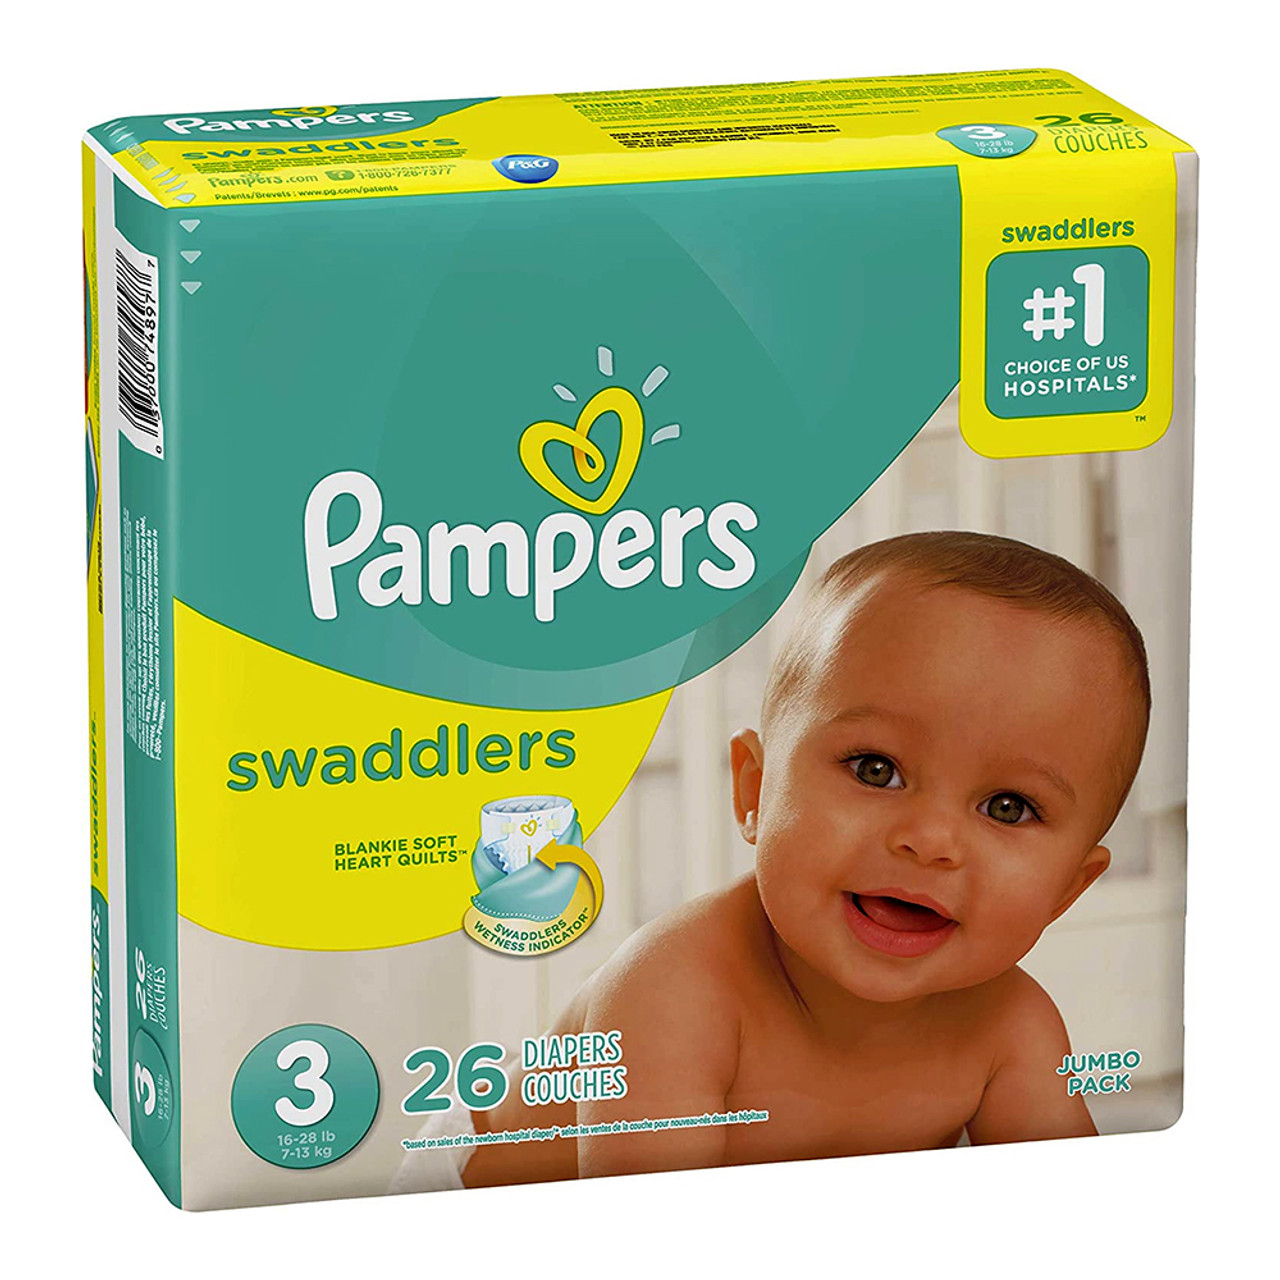 samen Ass Geelachtig Pampers Swaddlers Diapers, Soft and Absorbent, Size 3, 26 Ct